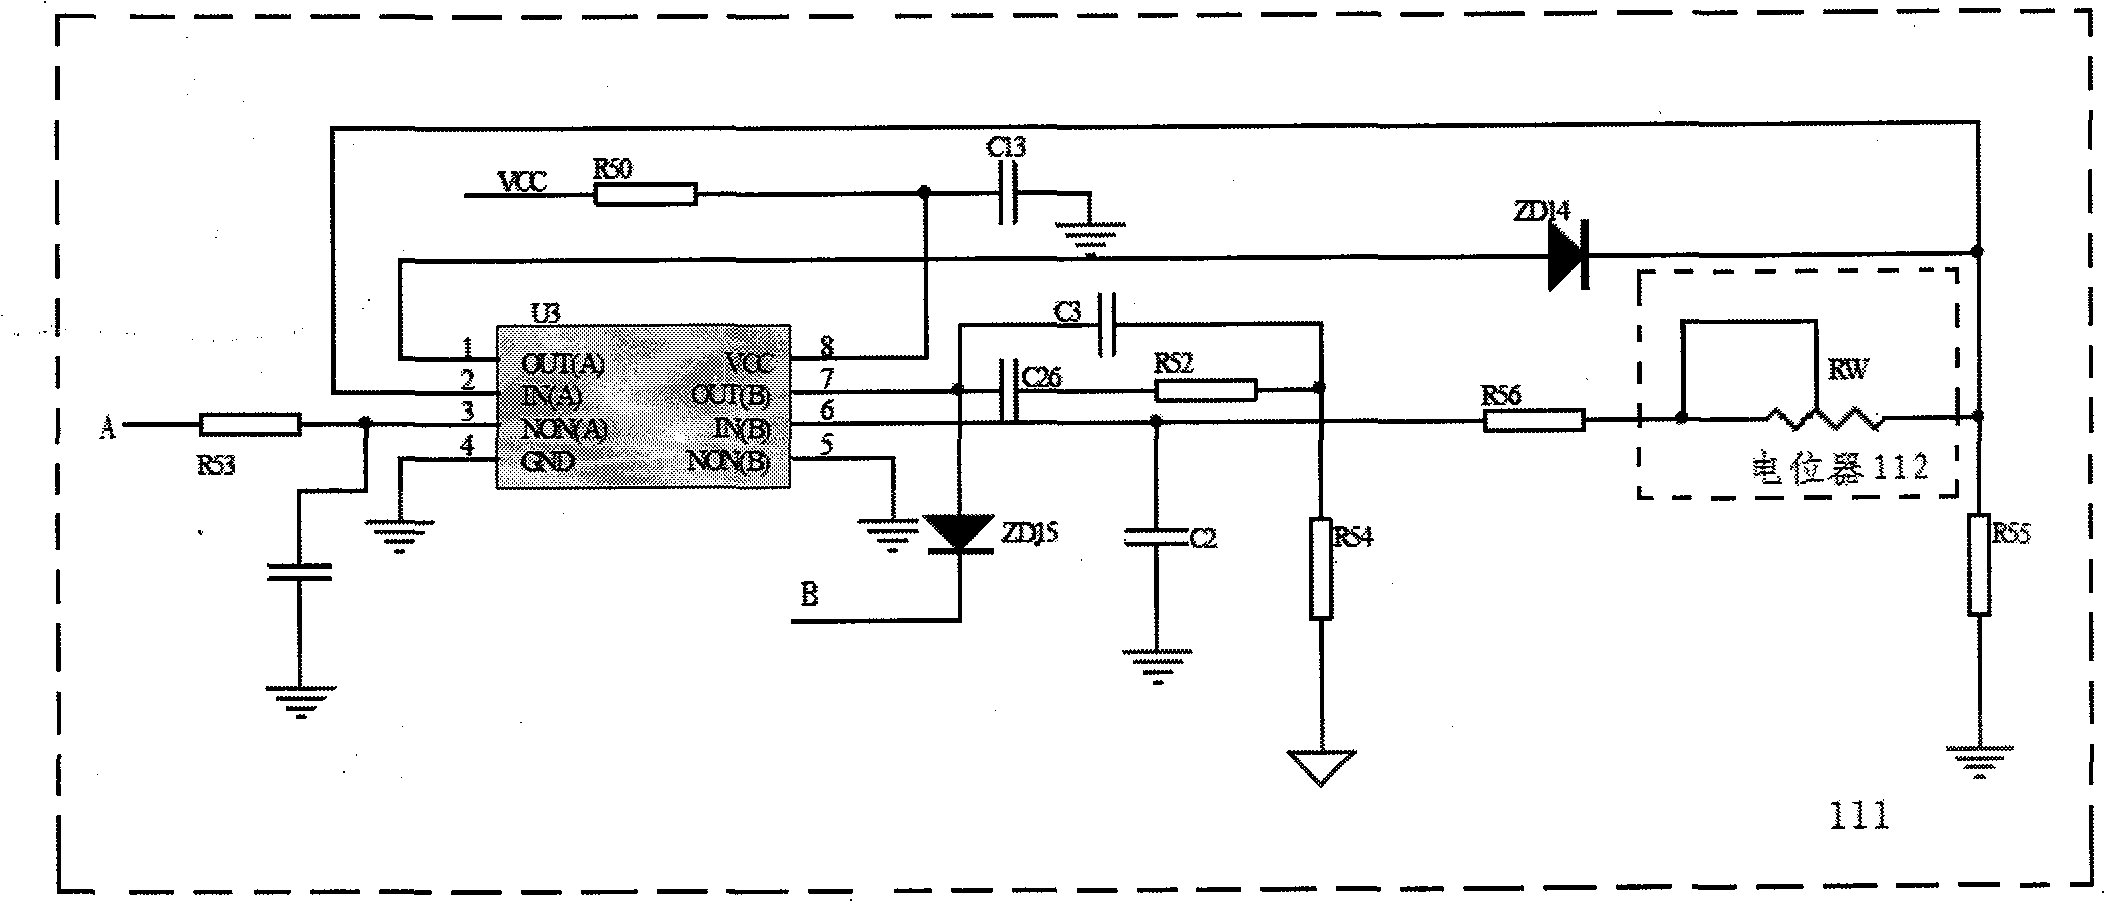 Electronic ballast for setting and adjusting output power in fixed time via dial-up